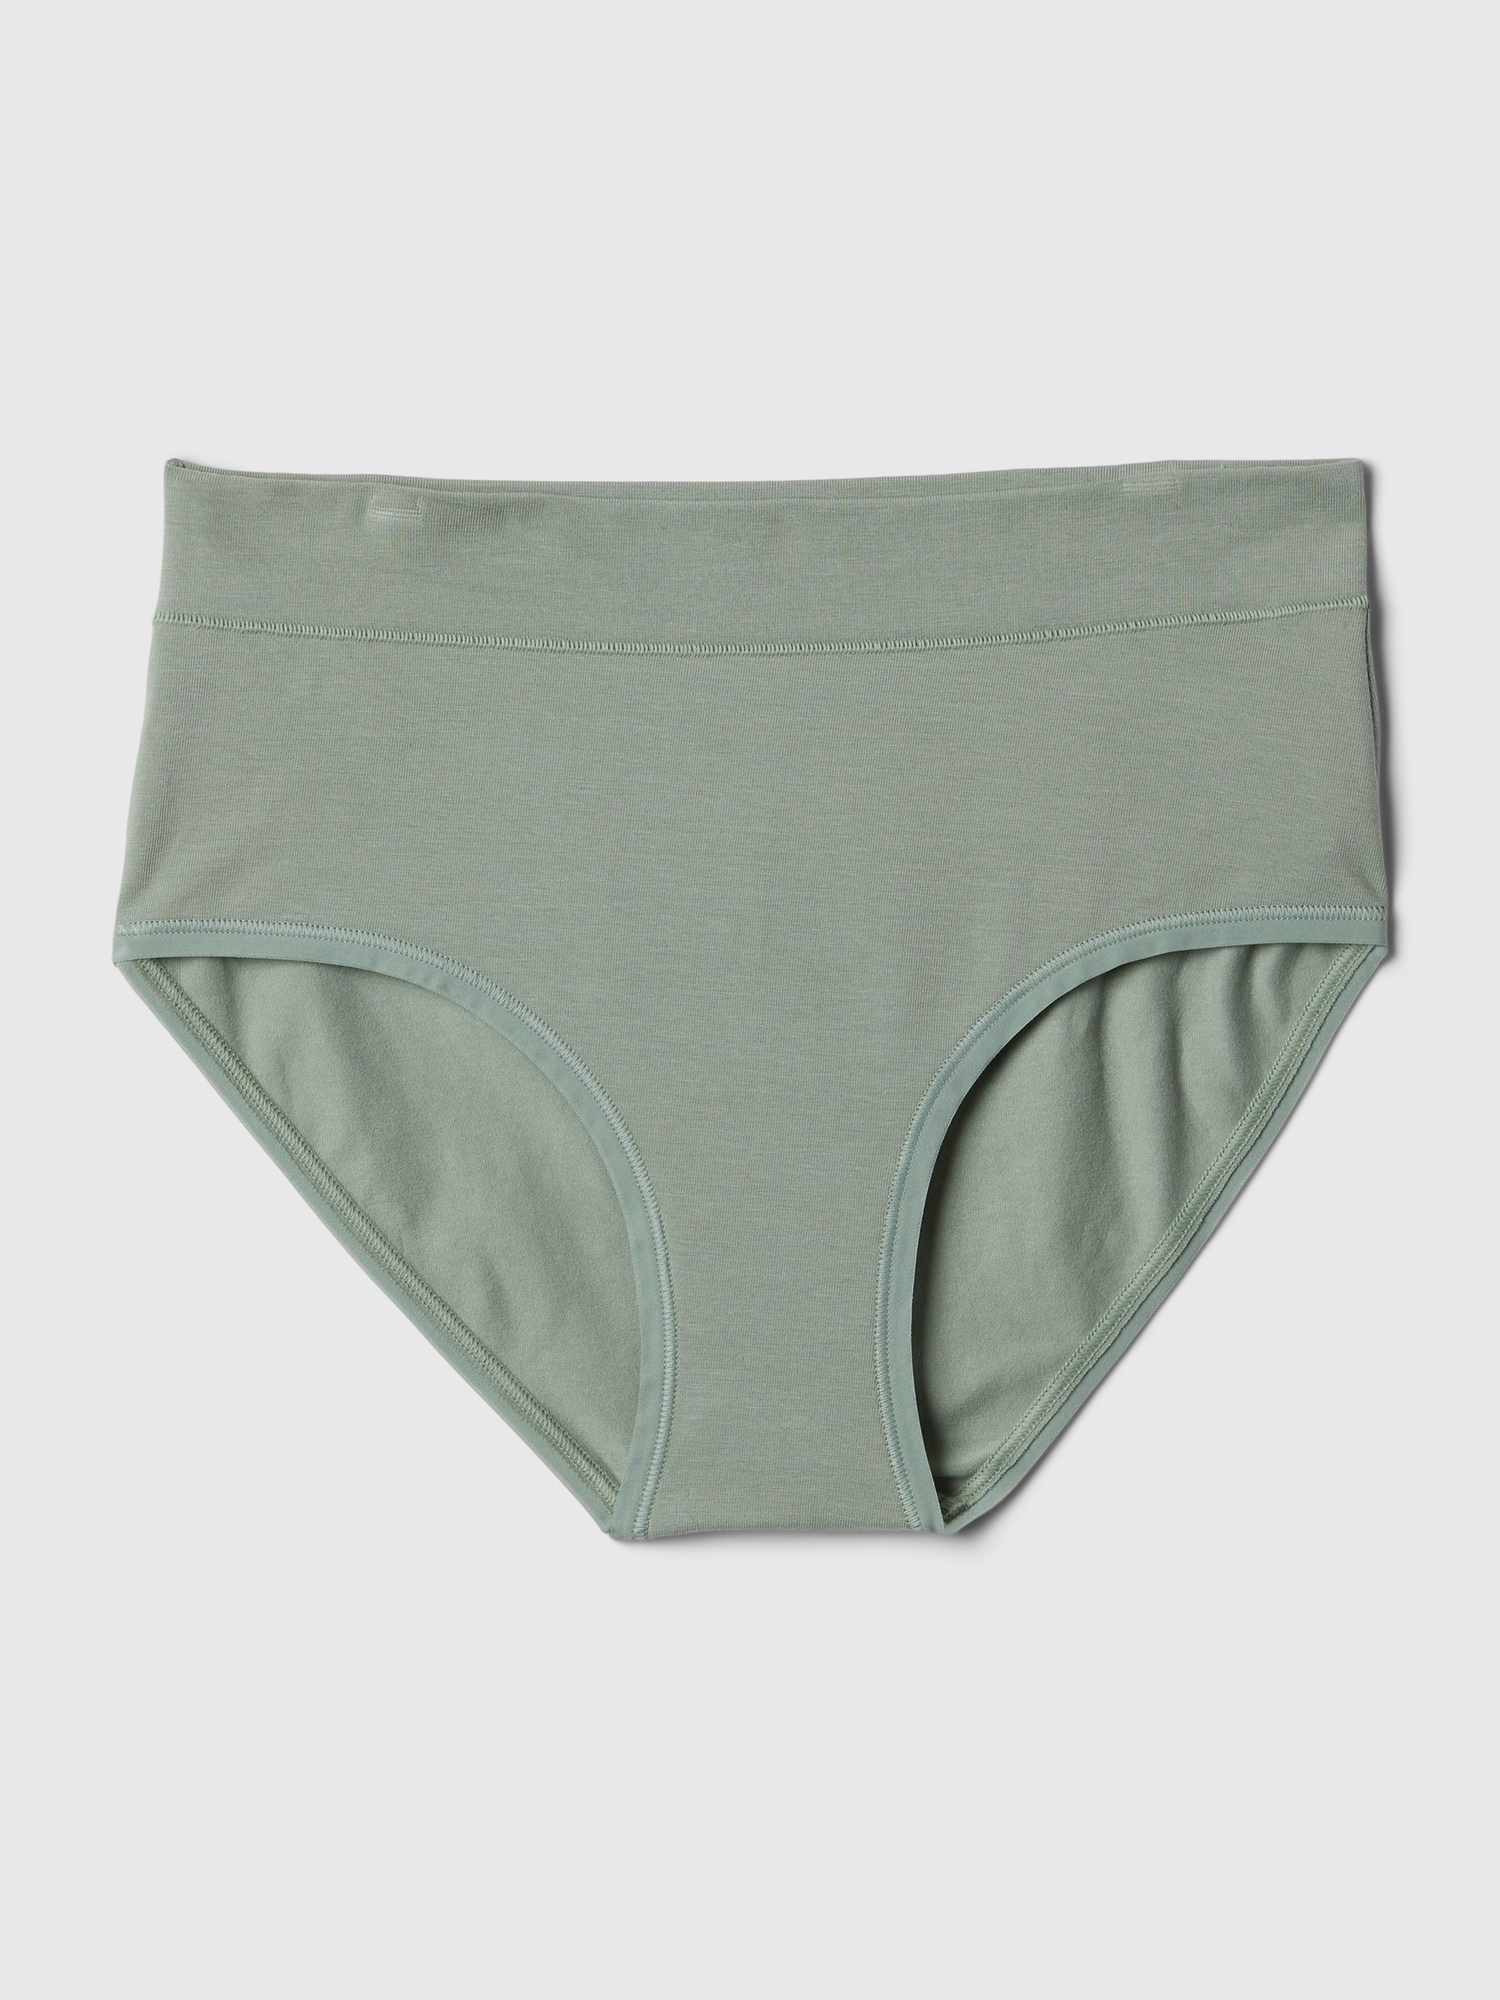 Buy Organic Cotton Seamless Hipster, Fast Delivery